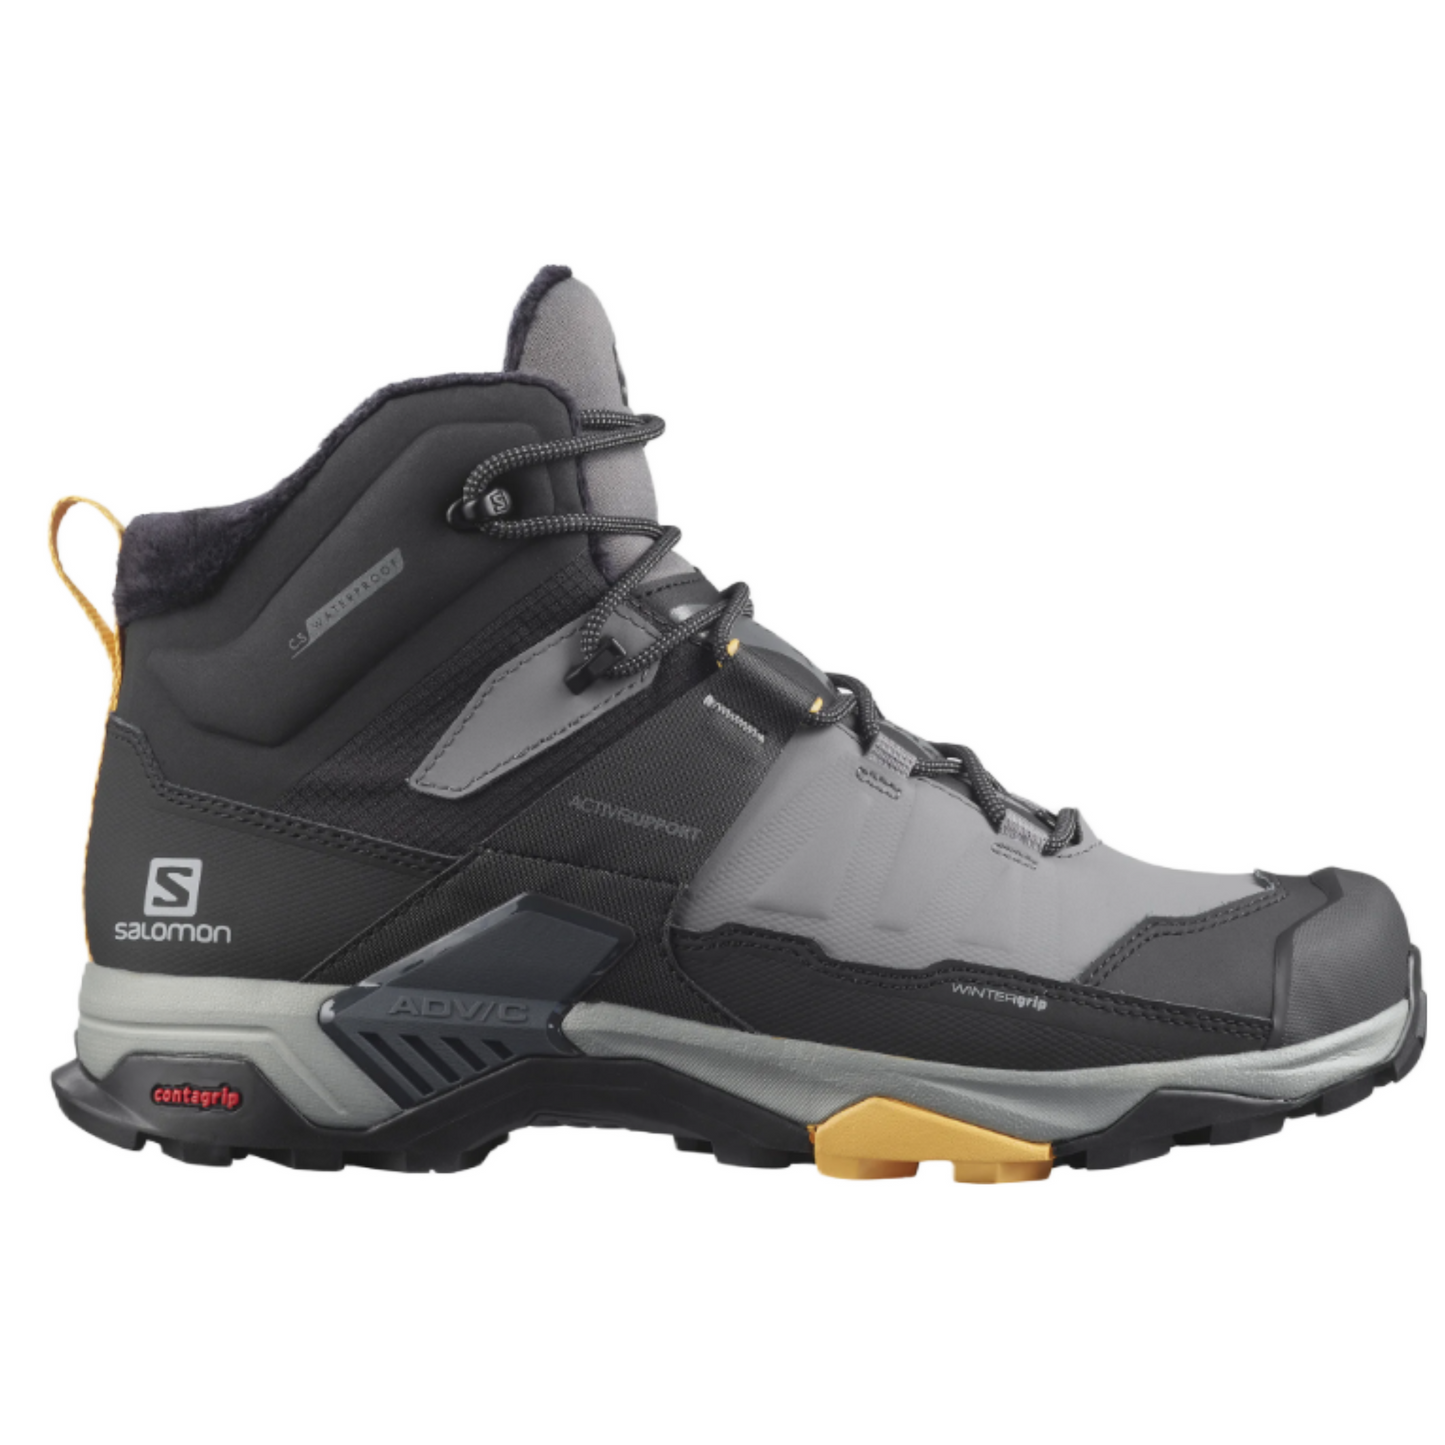 Men's Salomon X Ultra 4 Mid Winter Boots in black and grey